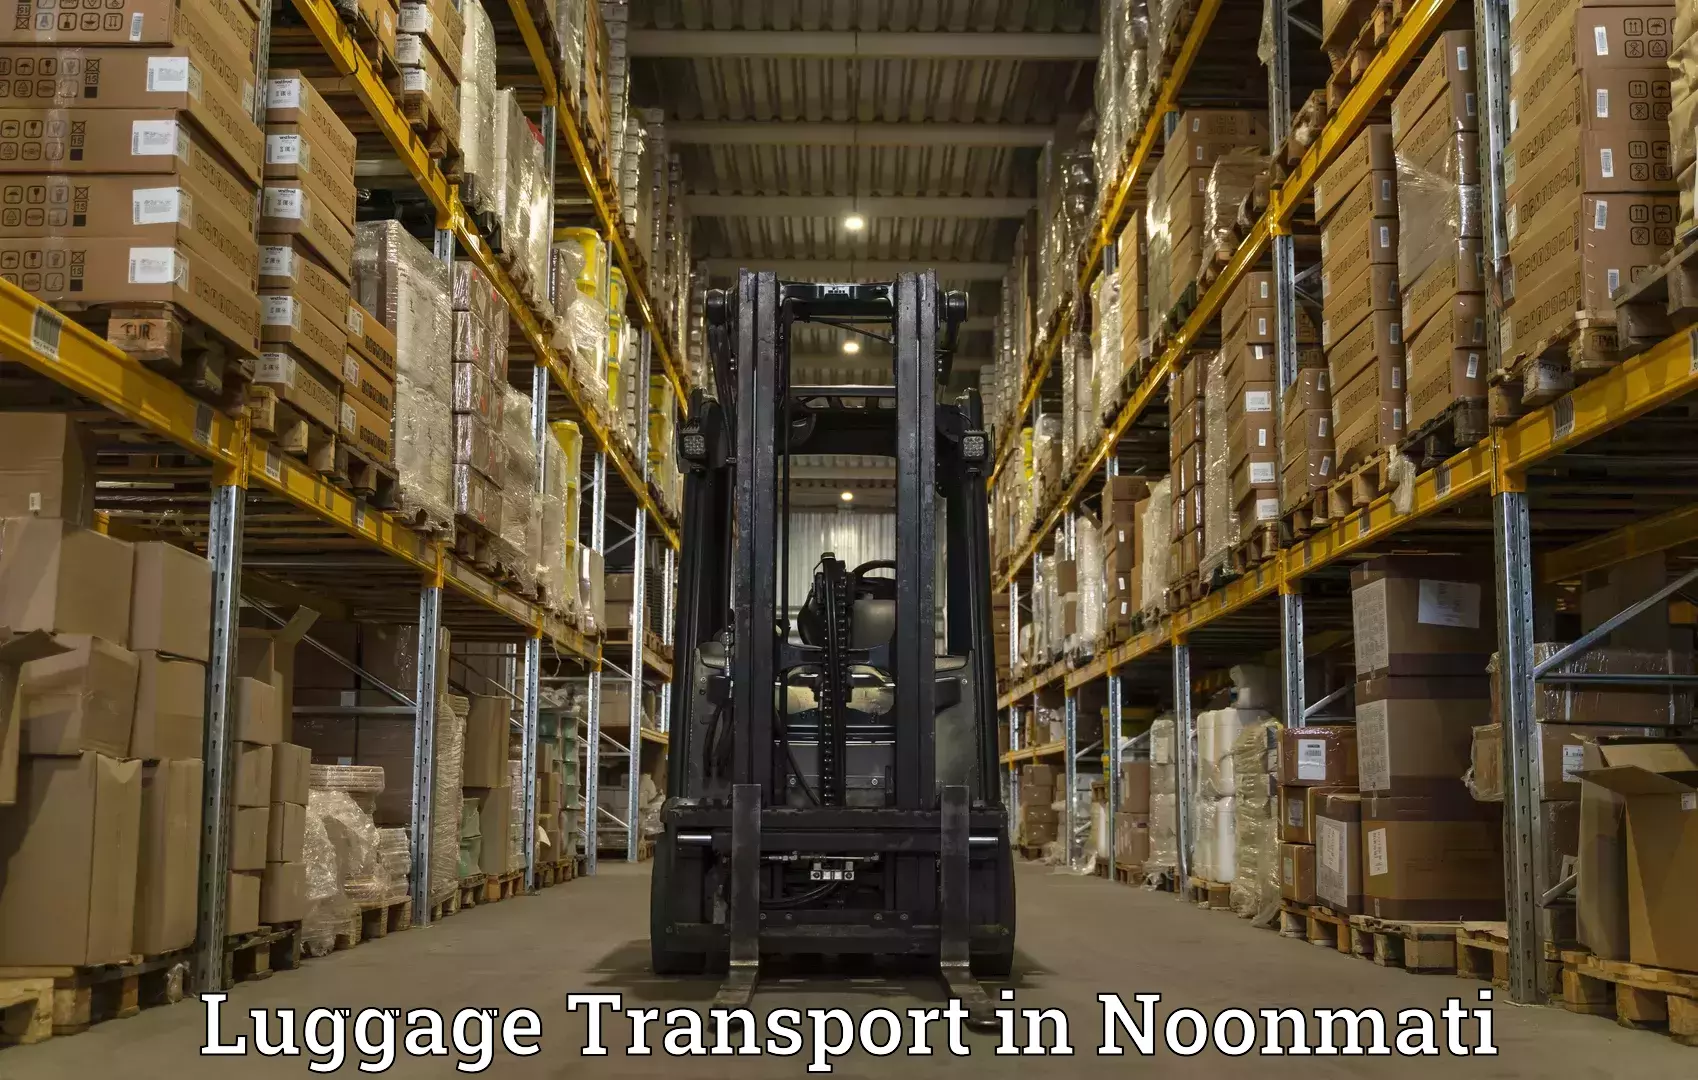 Luggage forwarding service in Noonmati